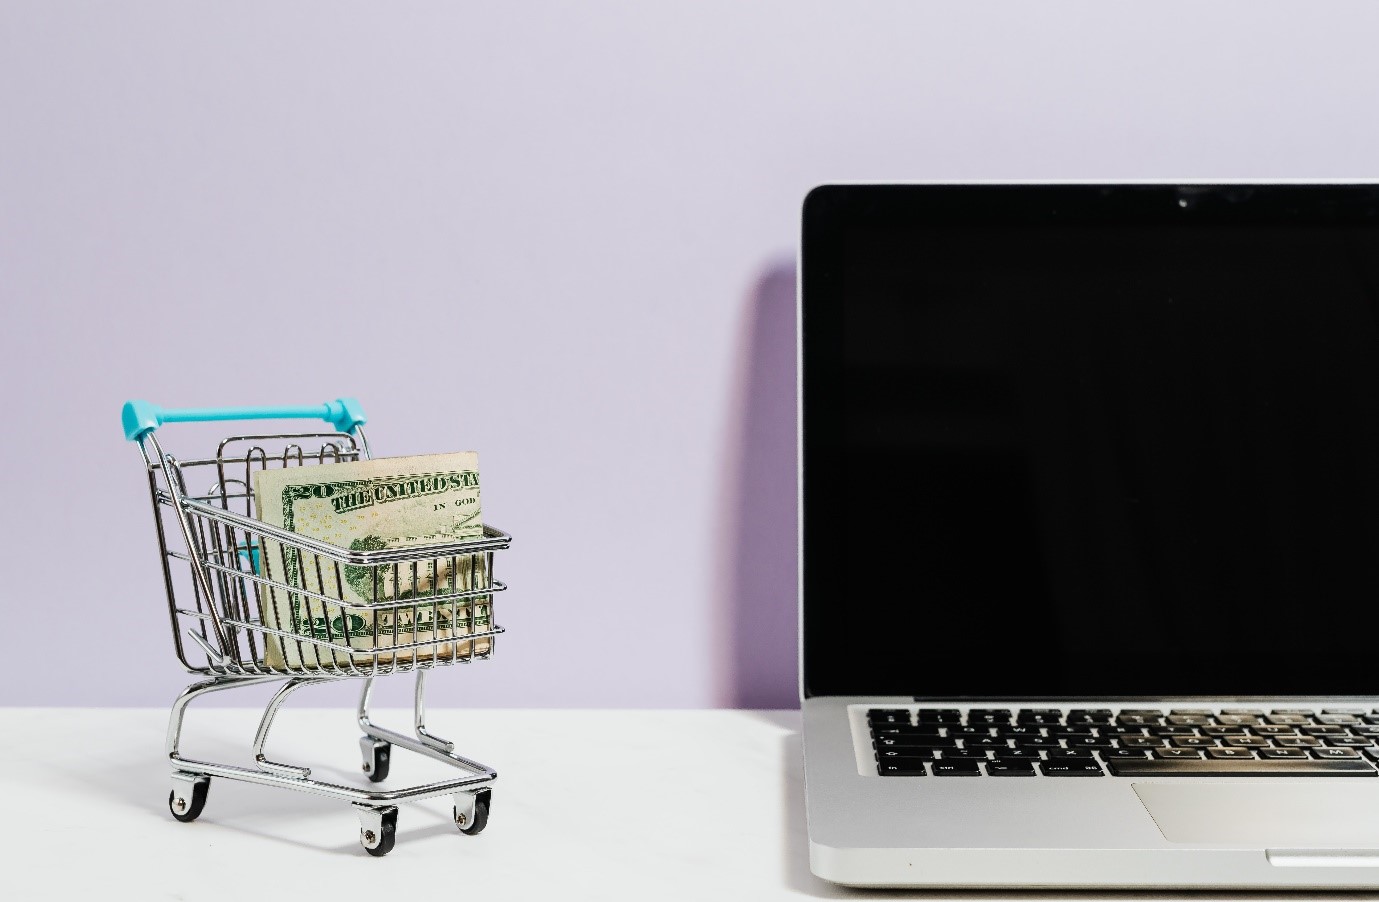 10 Reasons Why Your E-commerce Website Doesn’t Convert Shoppers